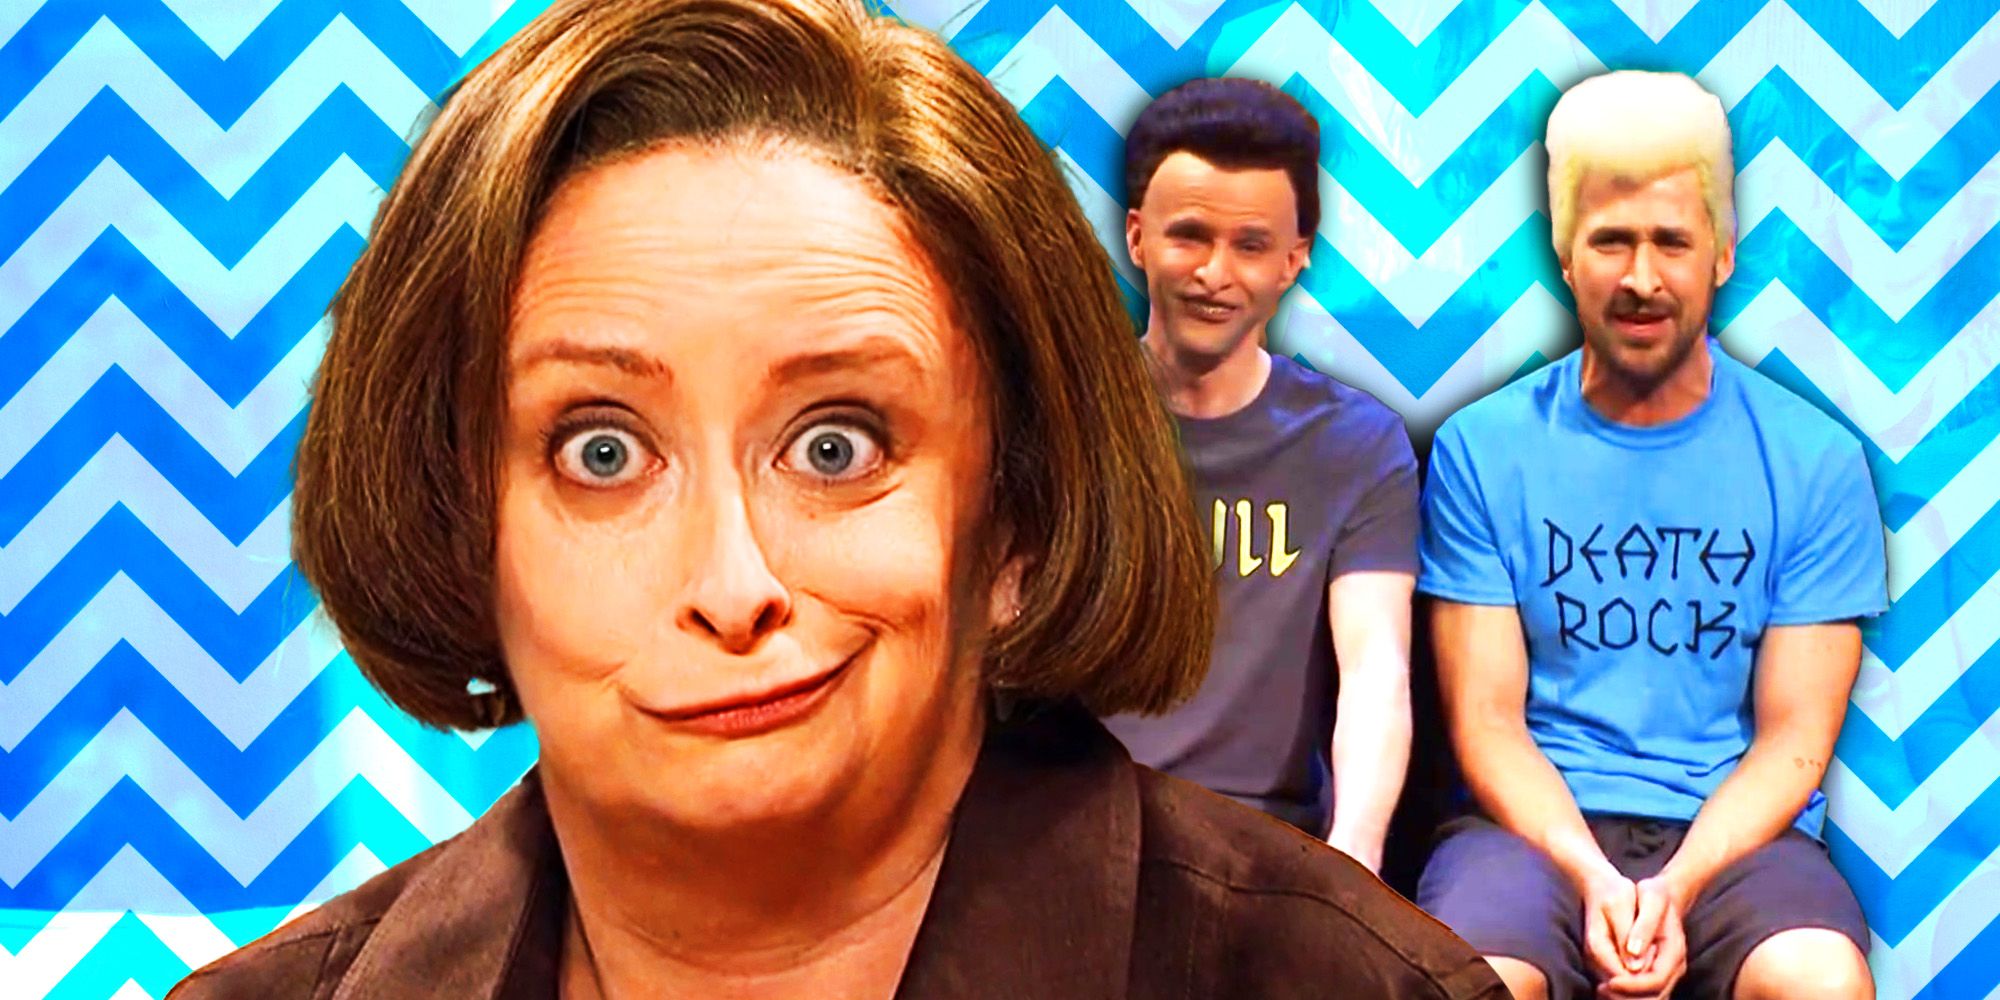 A custom image of Rachel Dratch as Debbie Downer in front of Ryan Gosling and Mikey Day as Beavis and Butt-Head.